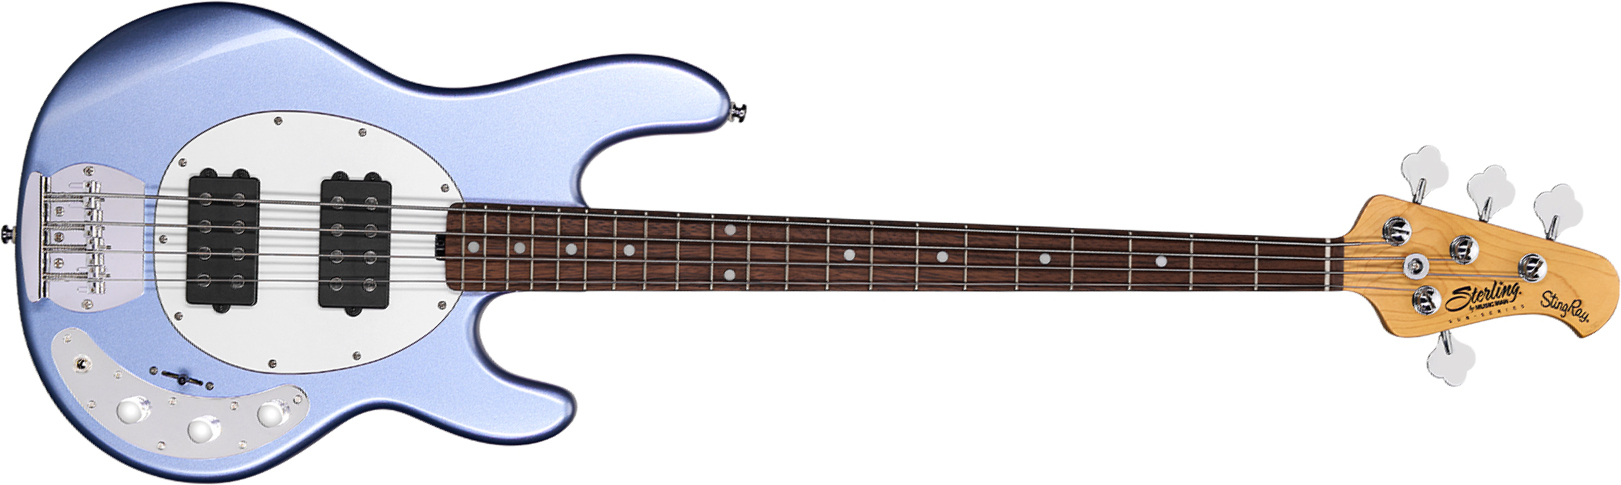 Sterling By Musicman Stingray Ray4hh Active Jat - Lake Blue Metallic - Solid body elektrische bas - Main picture